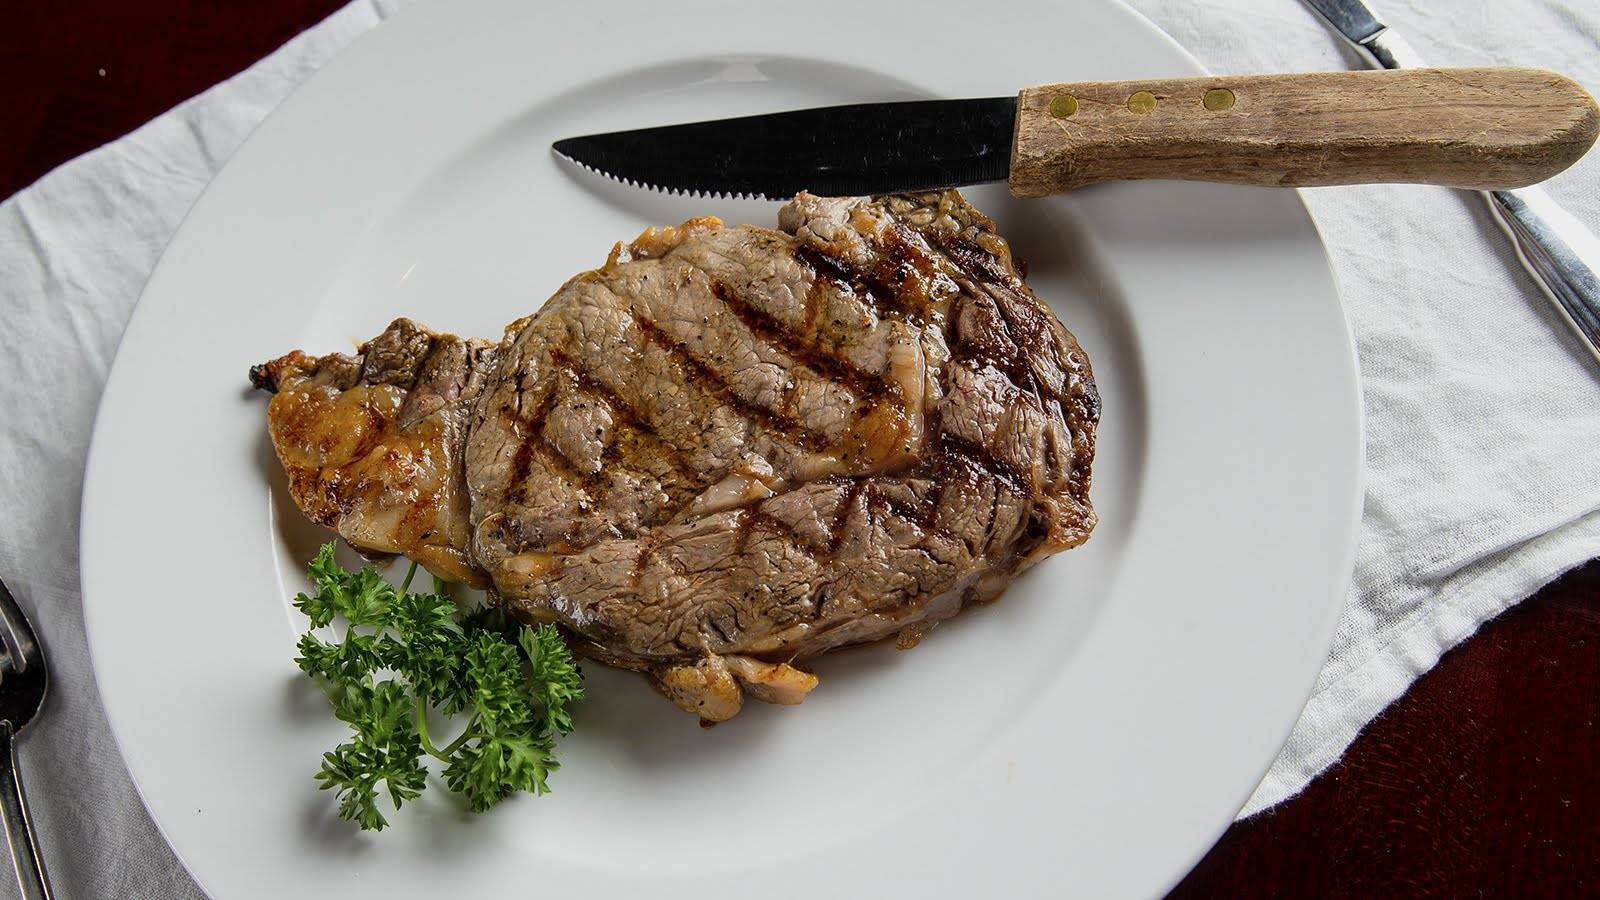 A 14 oz. bone-in ribeye with diamond grill marks rests on a white plate, which in turn sits on a small white cloth atop a wooden table. A wood-handled, serrated steak knife lays across the top of the plate, and a sprig of fresh parsley is tucked under the steak as garnish. Photo by Hamilton Walkerâ€™s.